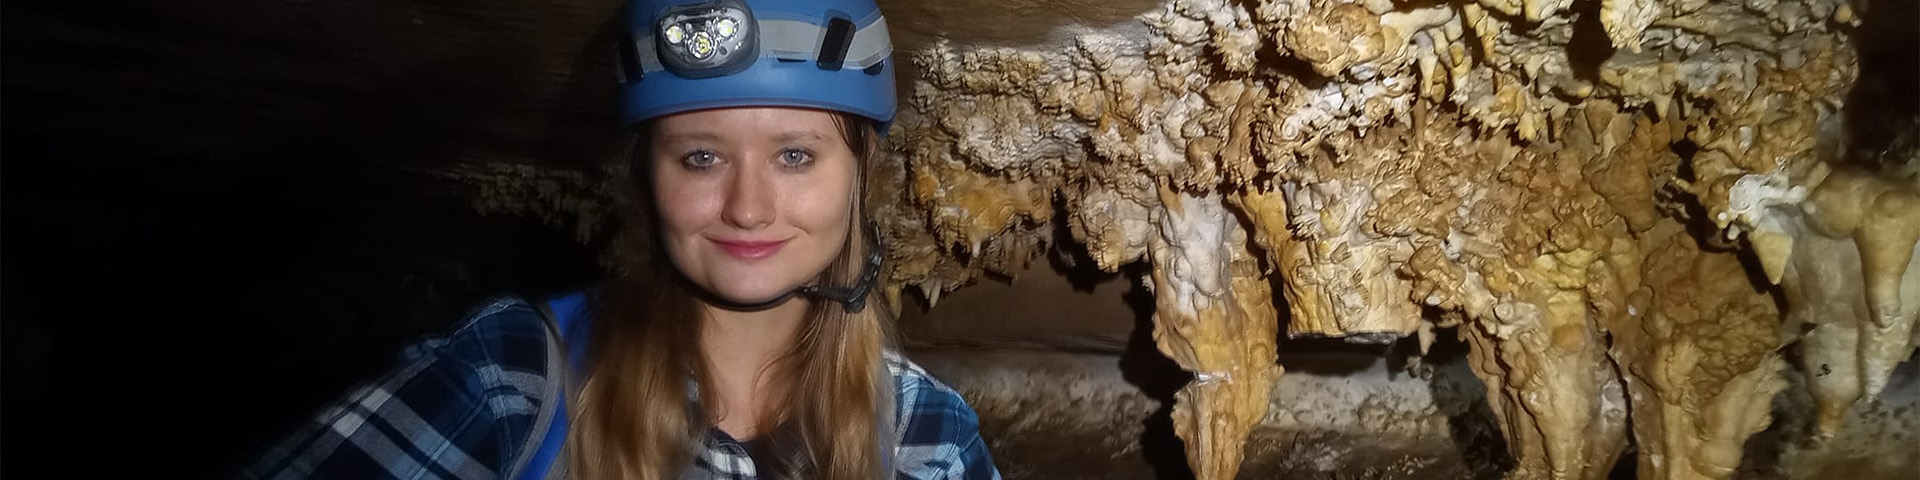 Girl in cave smiling